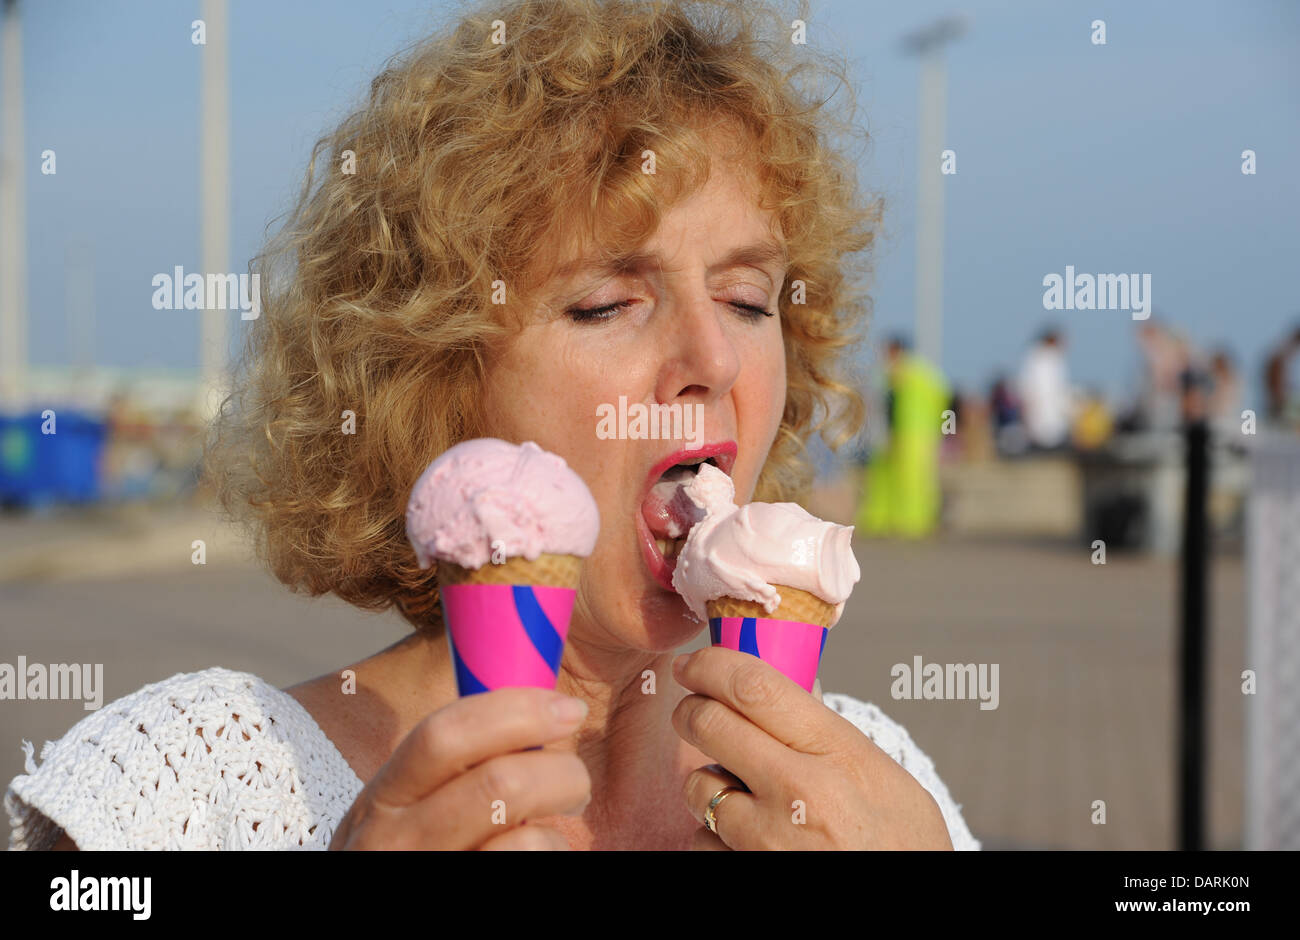 Mature middle aged woman 50s eating ice cream cones in hot weather Stock Photo